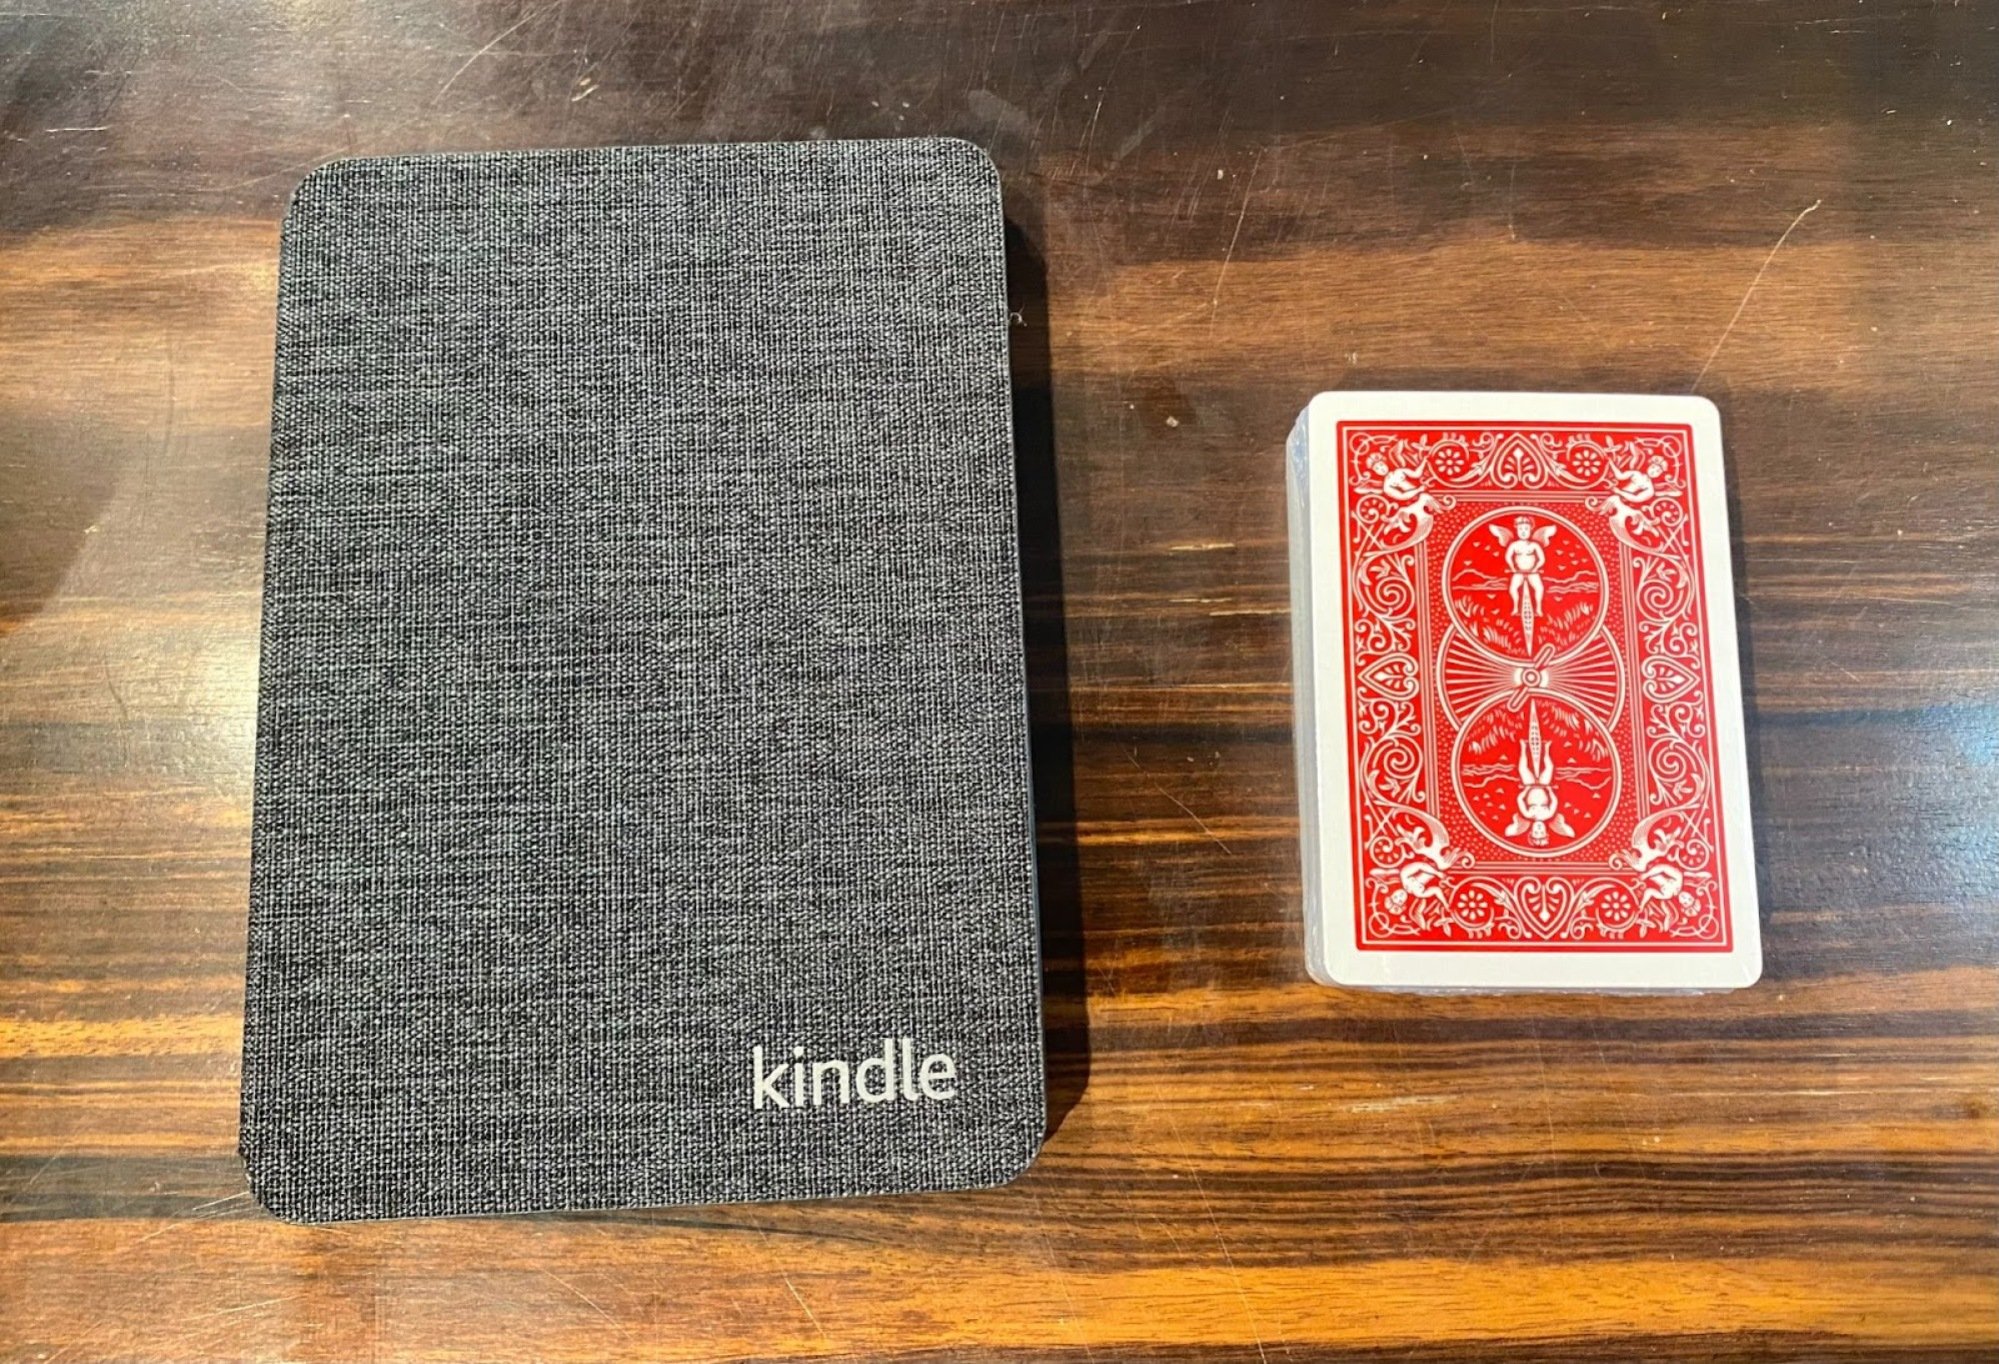 kindle next to a deck of playing cards to show how compact the kindle is